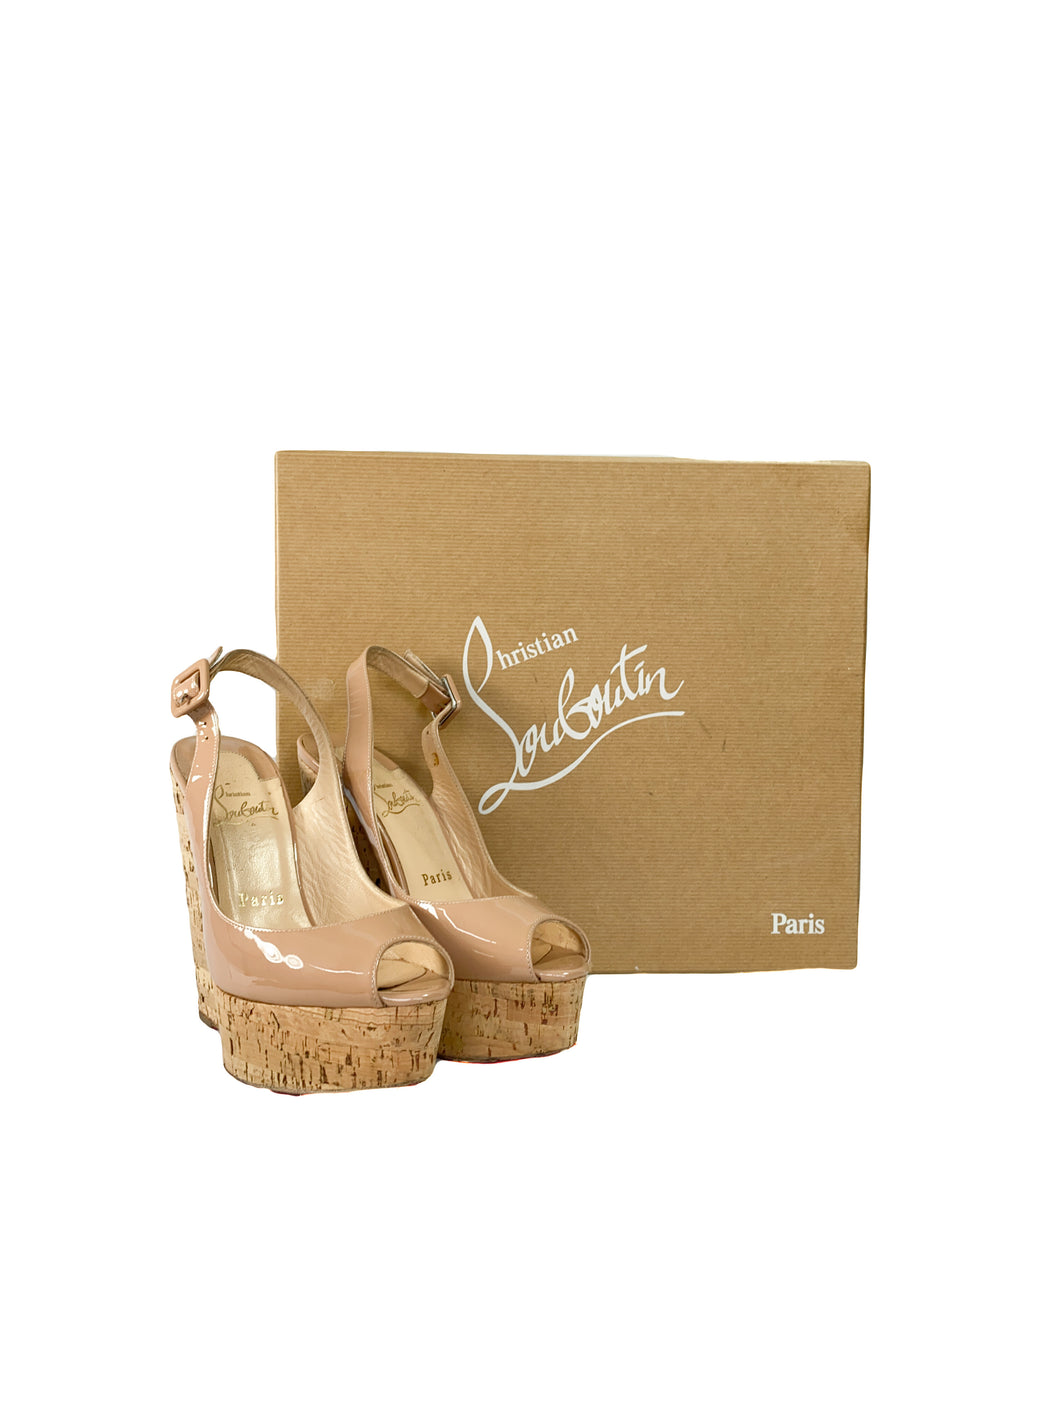 Christian Louboutin nude patent leather wedges size 36.5